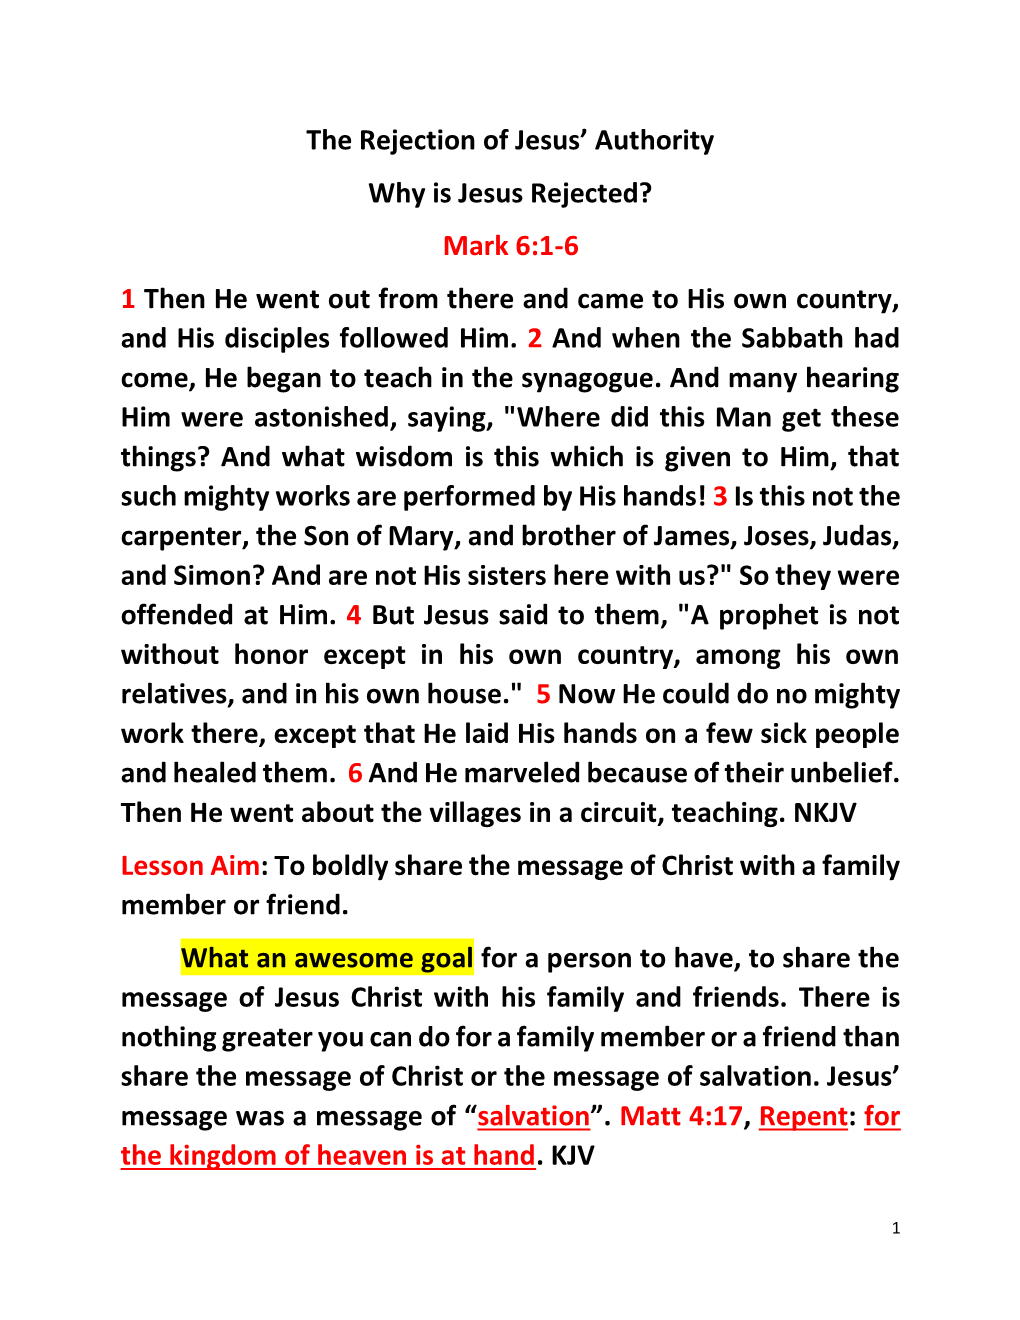 The Rejection of Jesus' Authority Why Is Jesus Rejected?